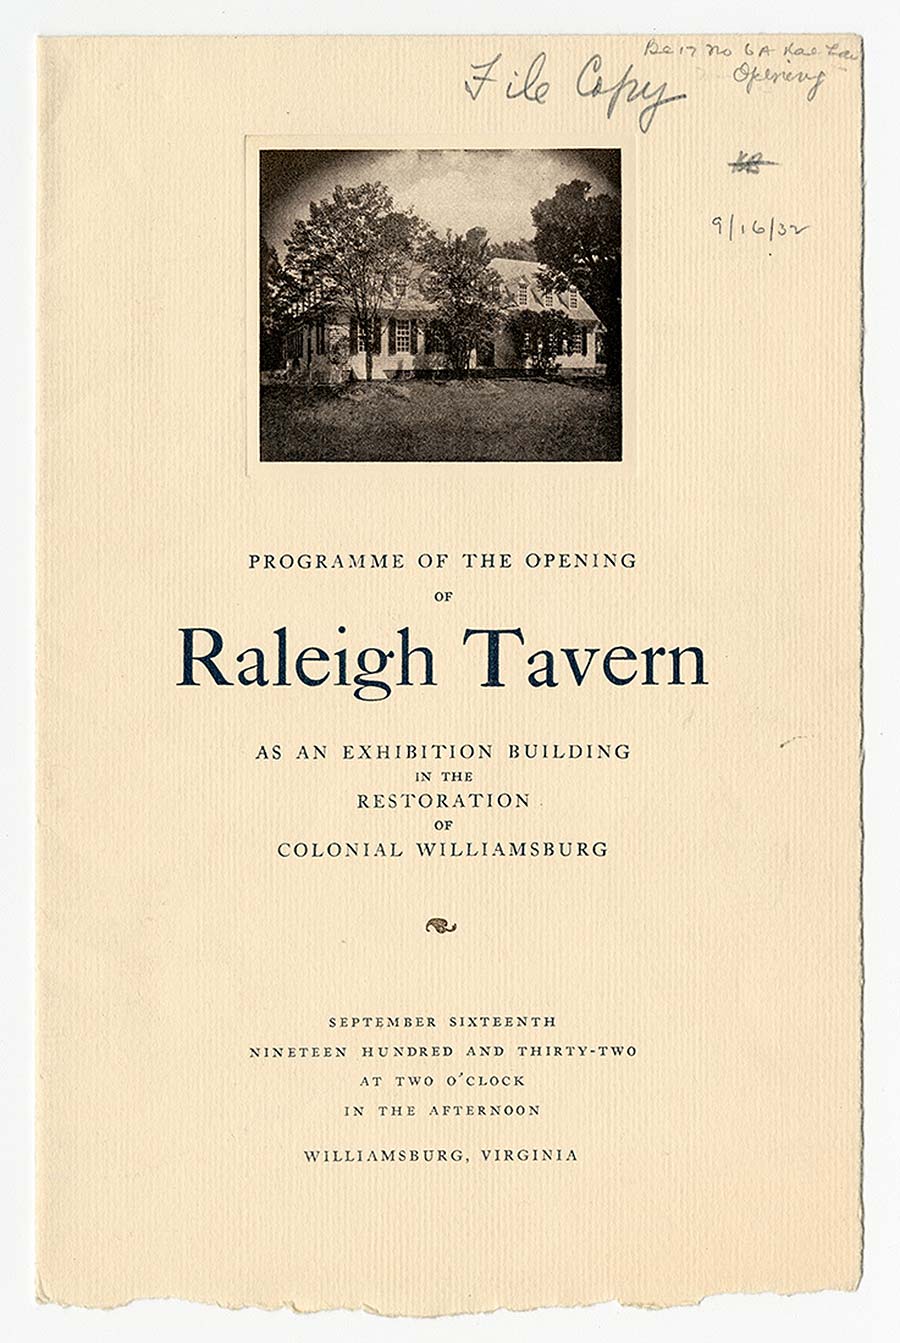 Programme of the Opening of Raleigh Tavern, September 16, 1932. 